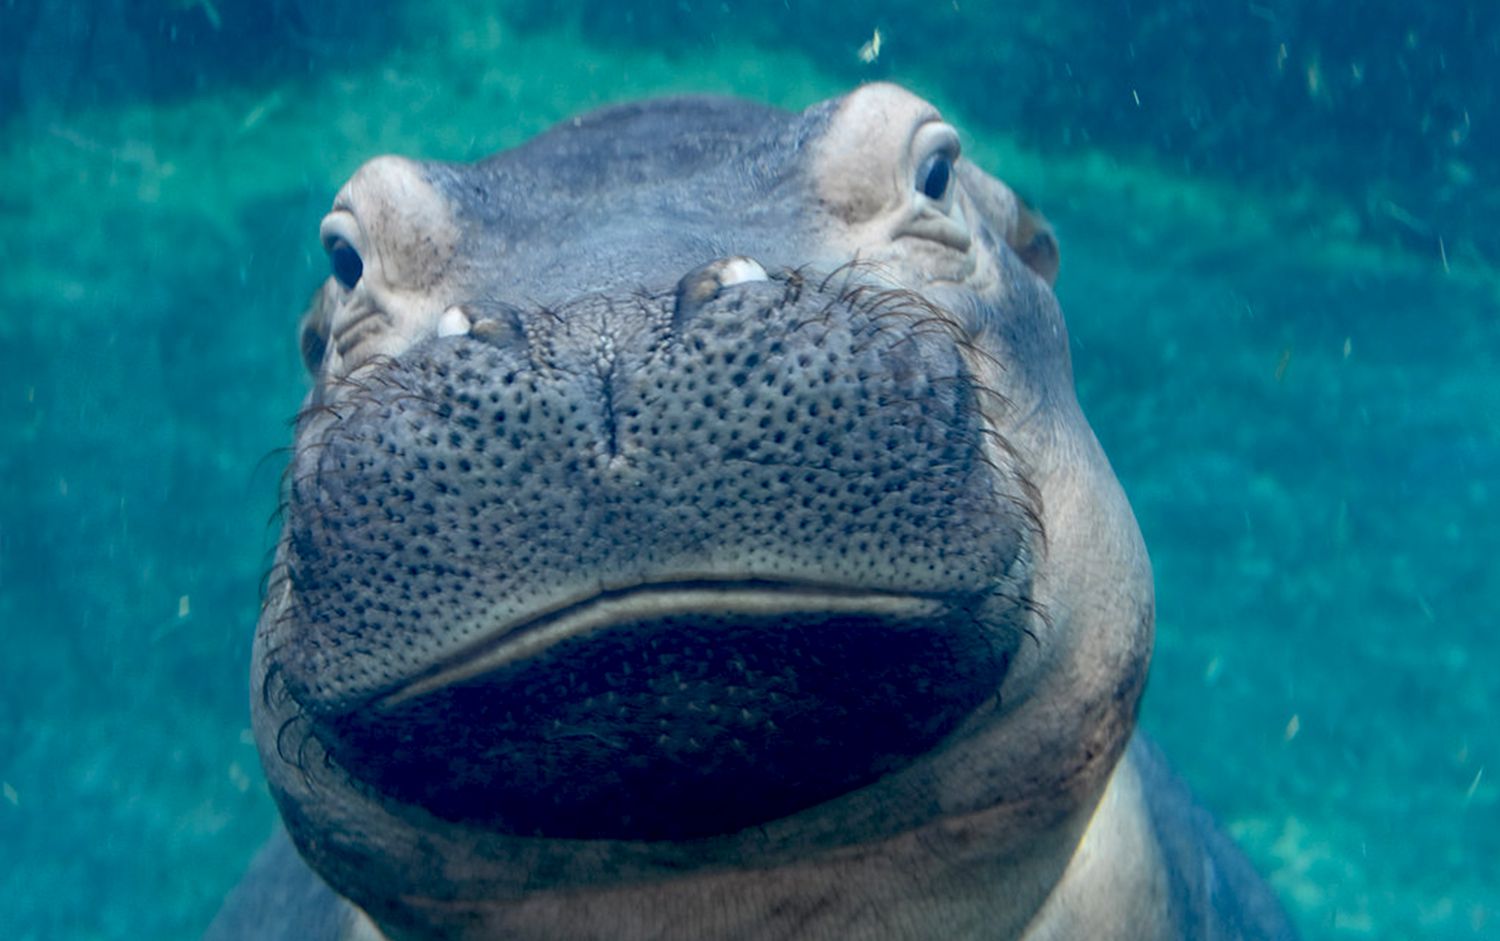 Fiona the hippo under water